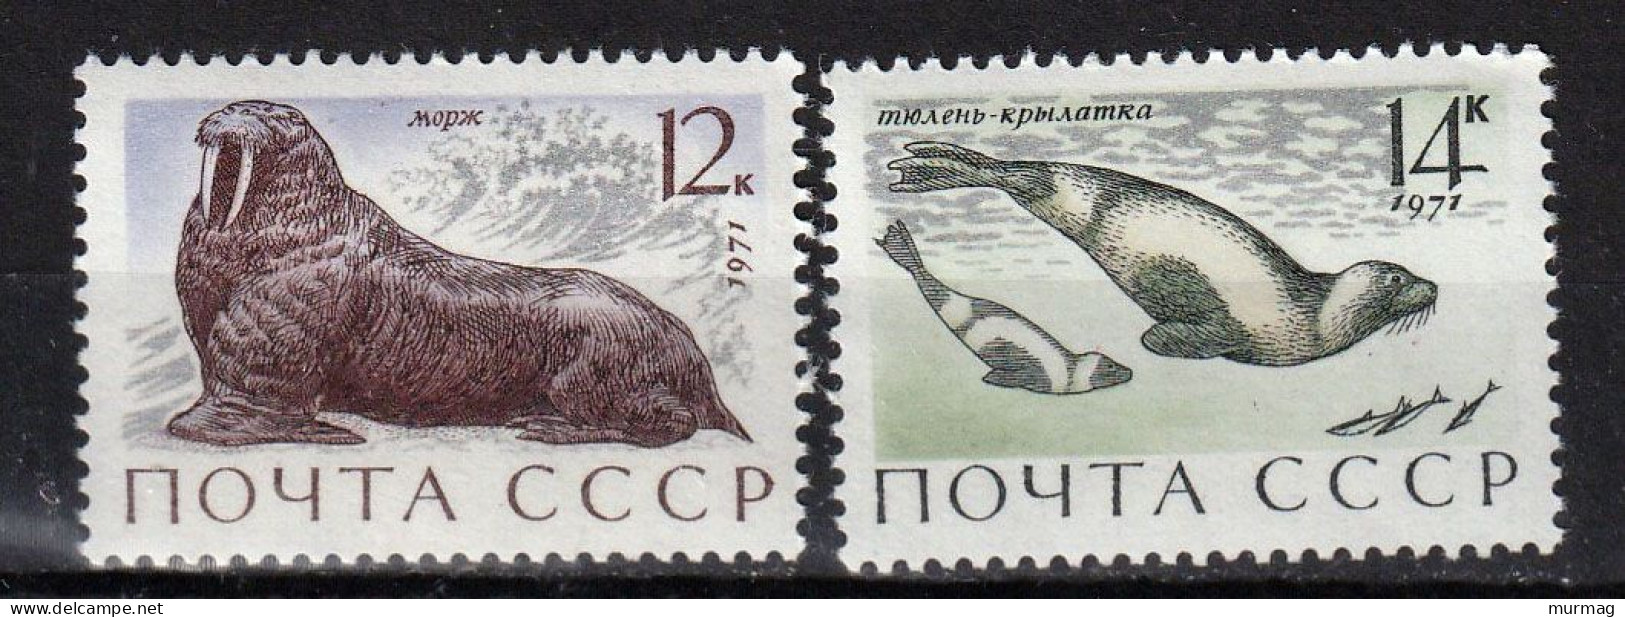 U.R.S.S. - Faune, Animaux Marins - 1971 - MNH - Unused Stamps